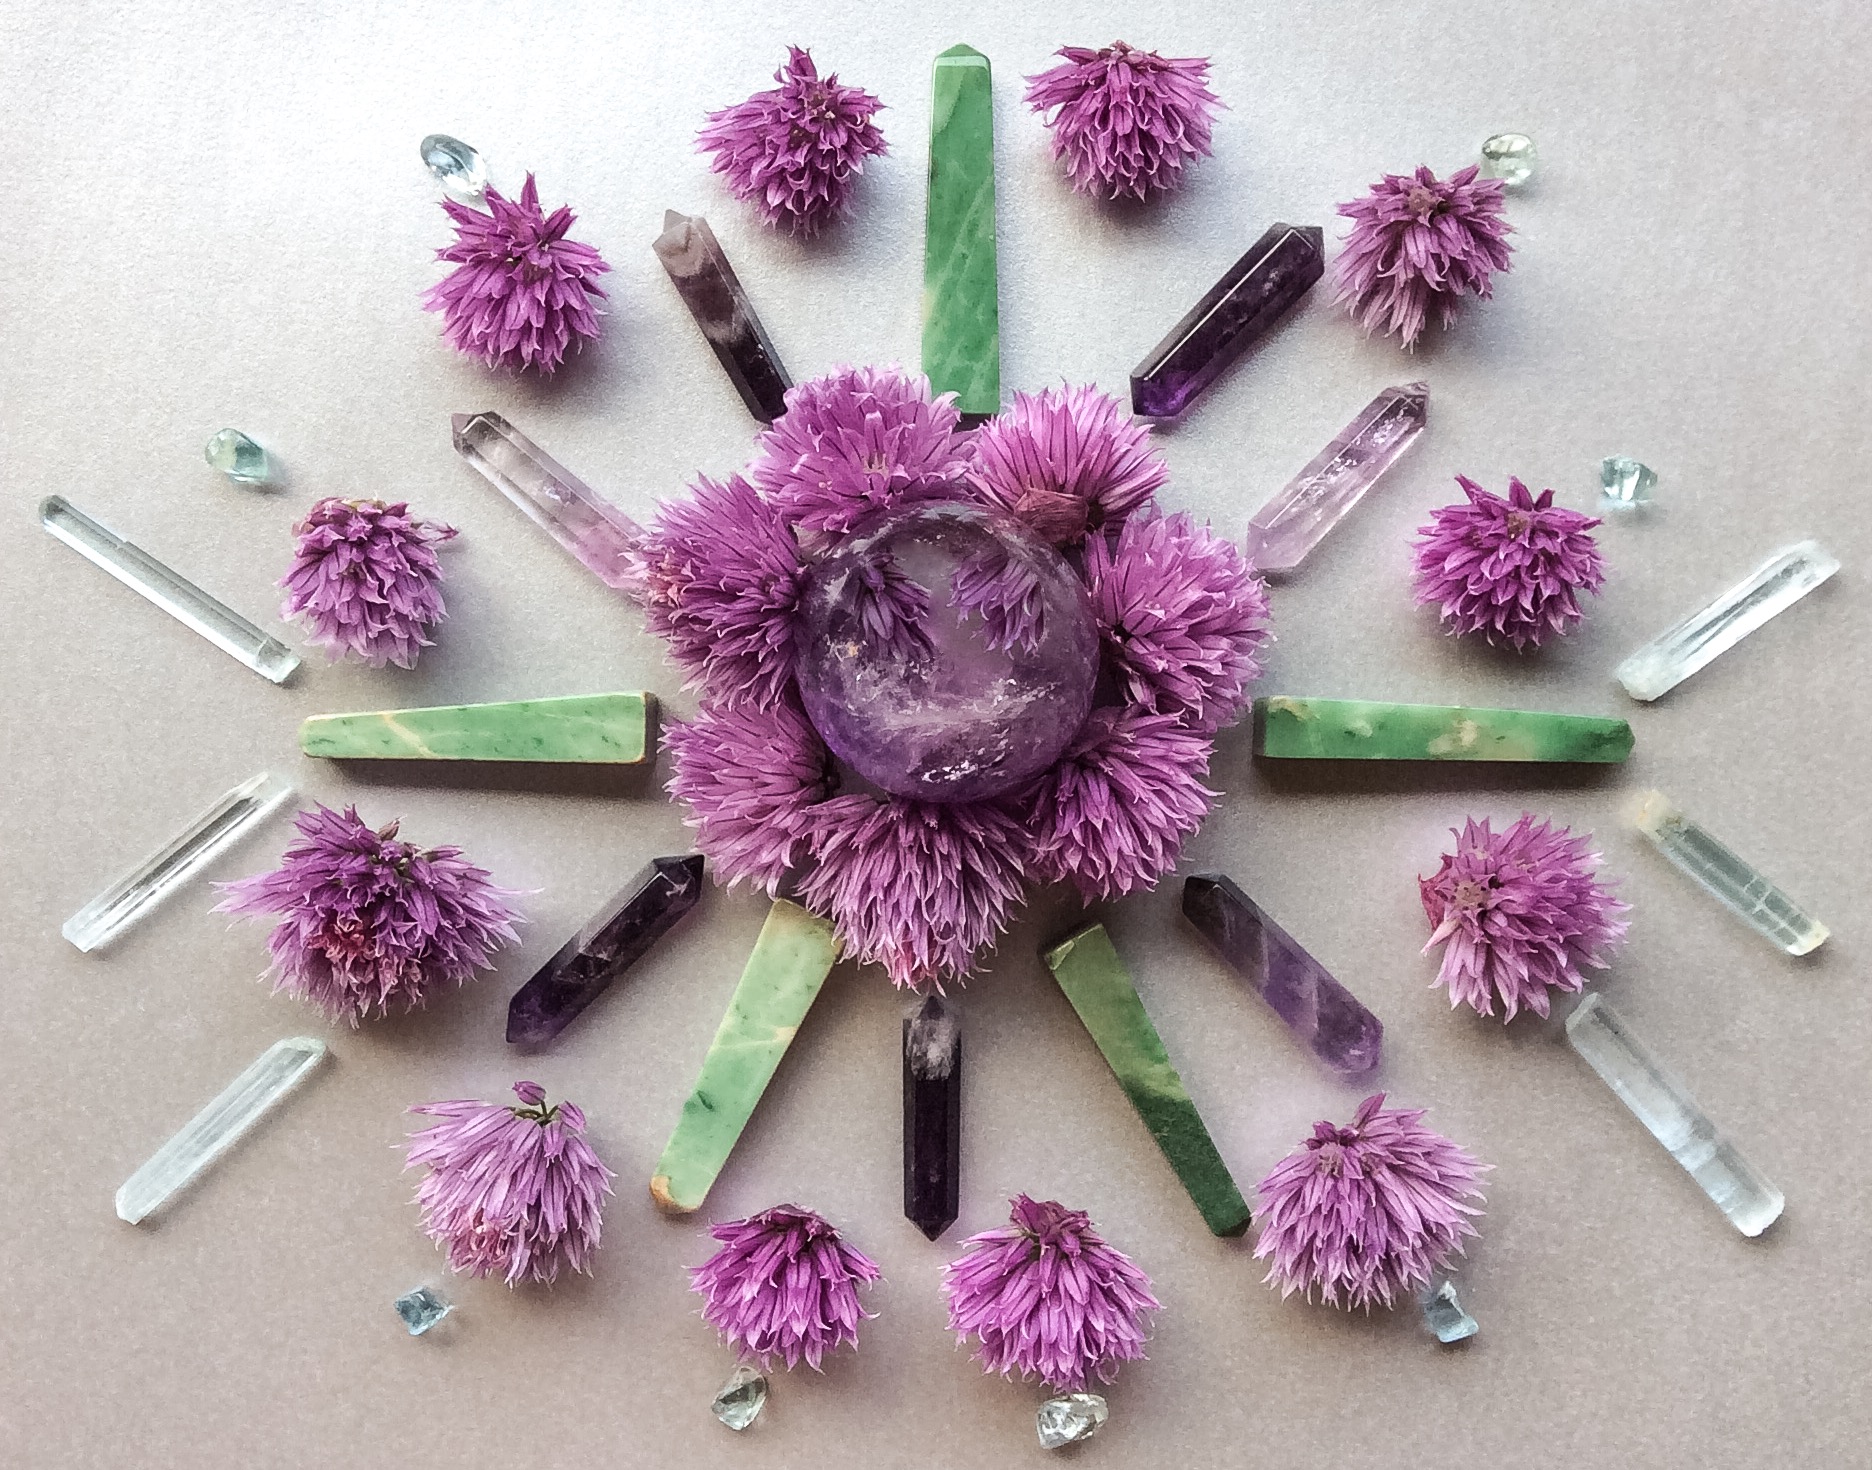 Amethyst, Chrysoprase, Aquamarine and Chive flowers